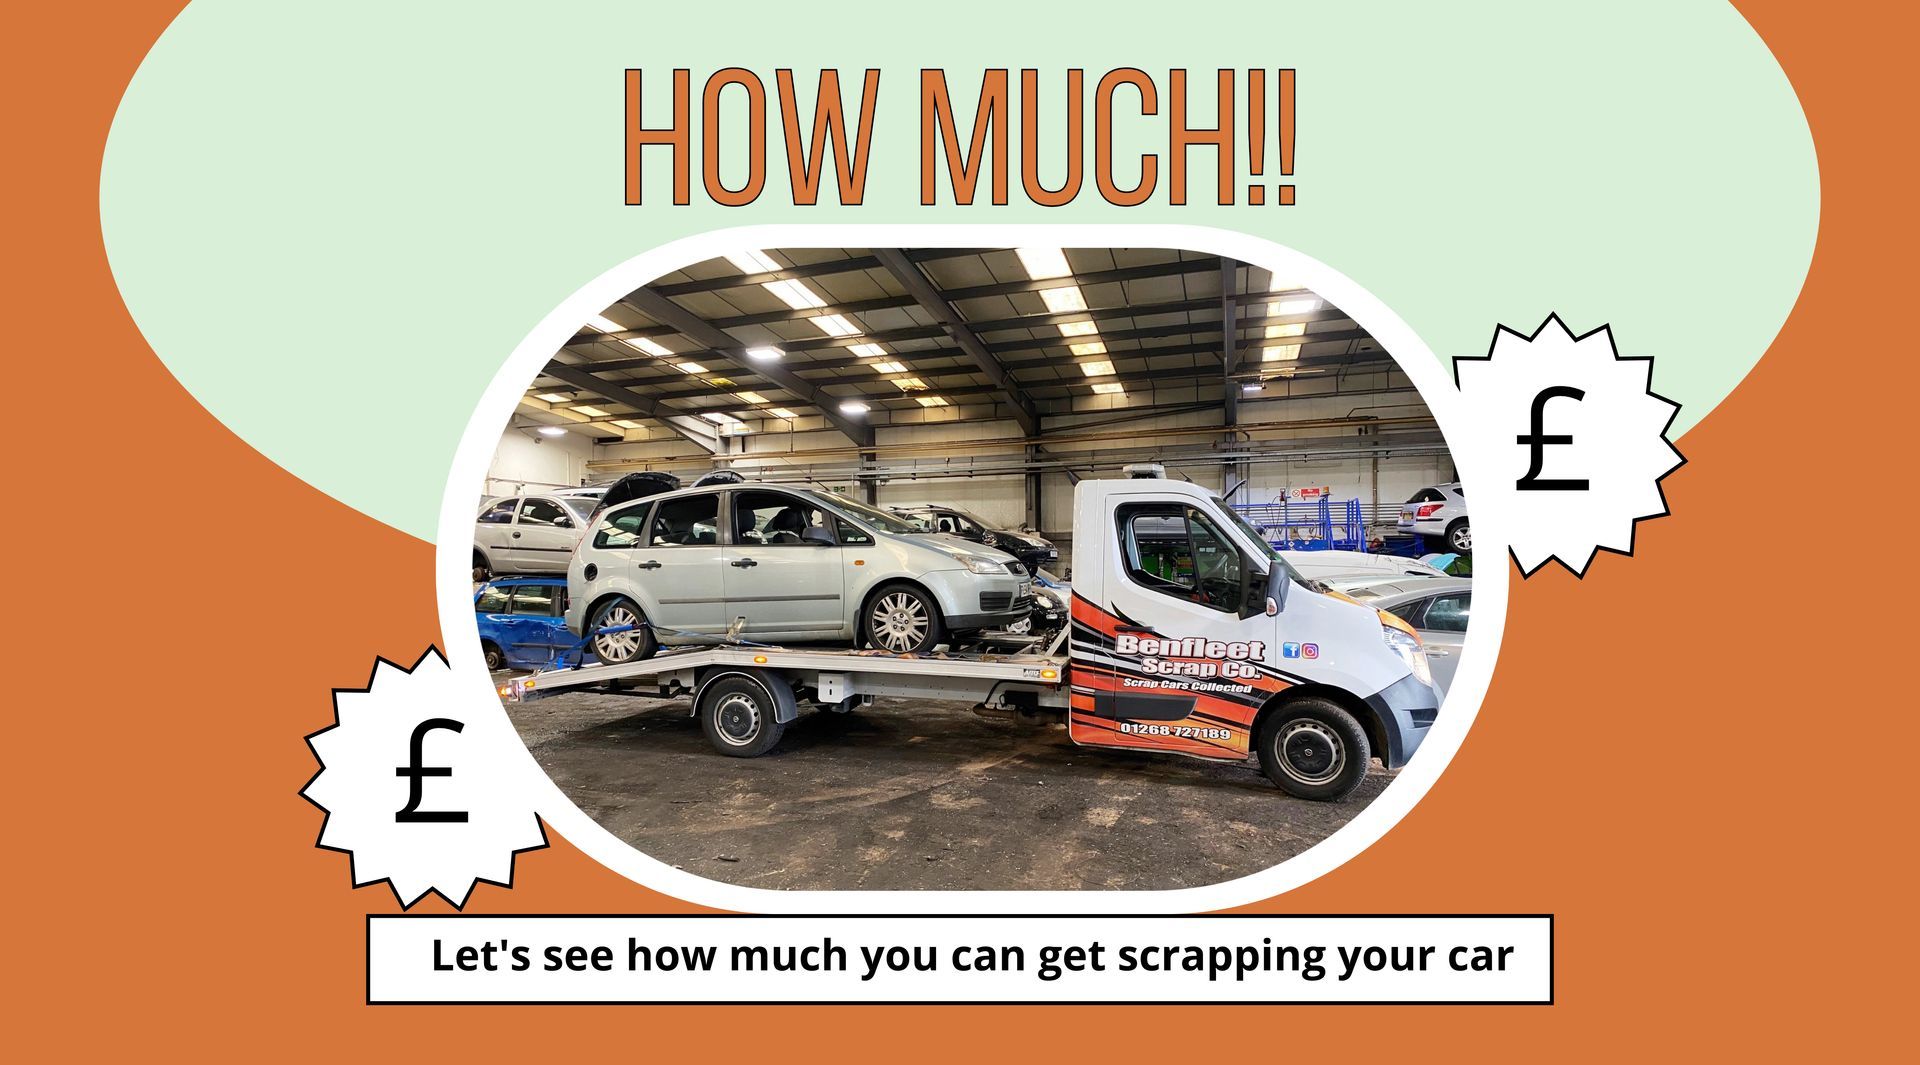 How Much is Scrap Value for a Car?